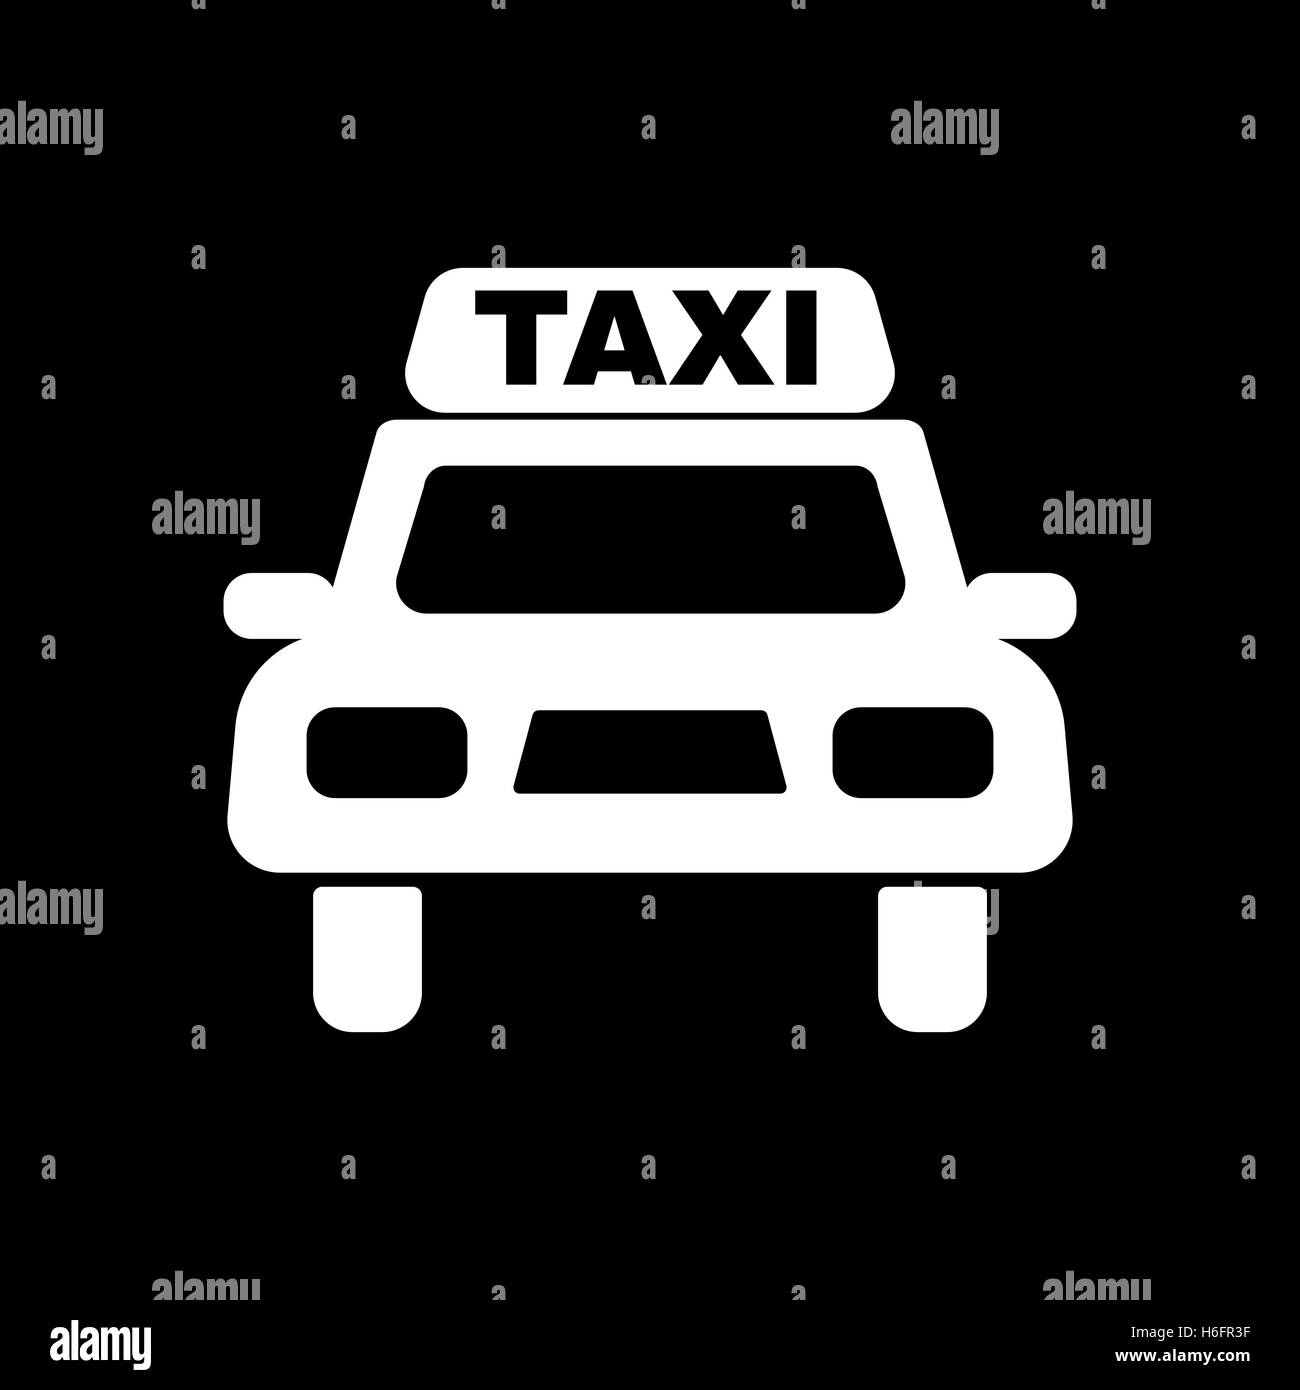 The taxi icon. Taxicab symbol. Flat Vector illustration Stock Vector